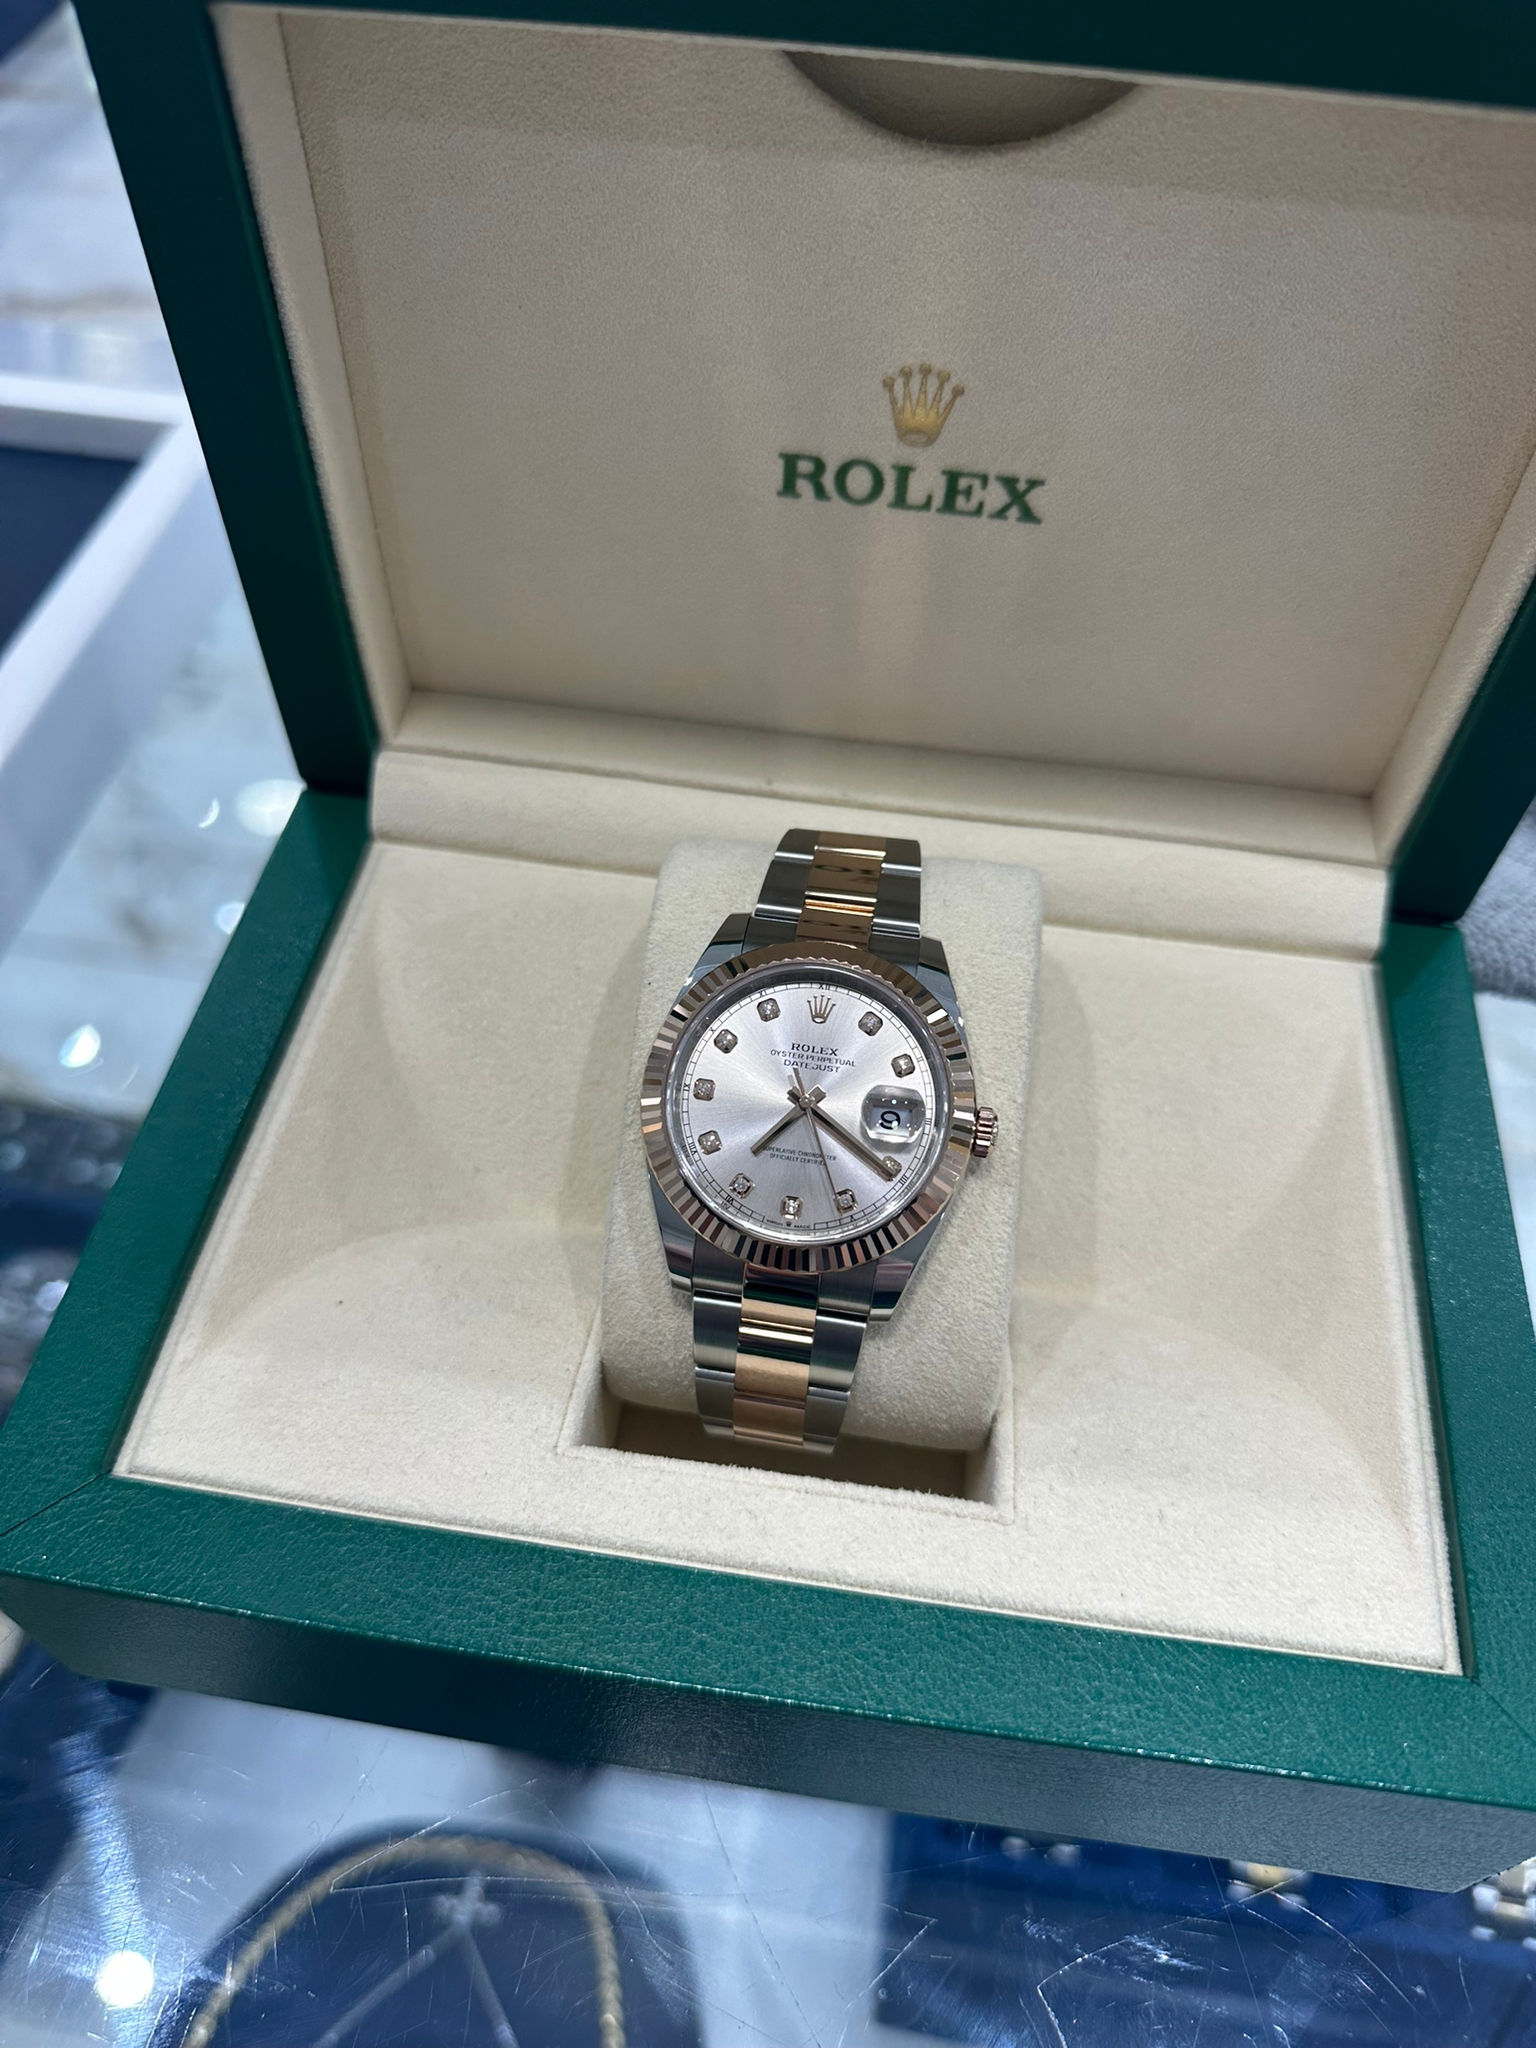 Rolex Datejust 41mm steel and rose gold with Sundu - Image 3 of 11